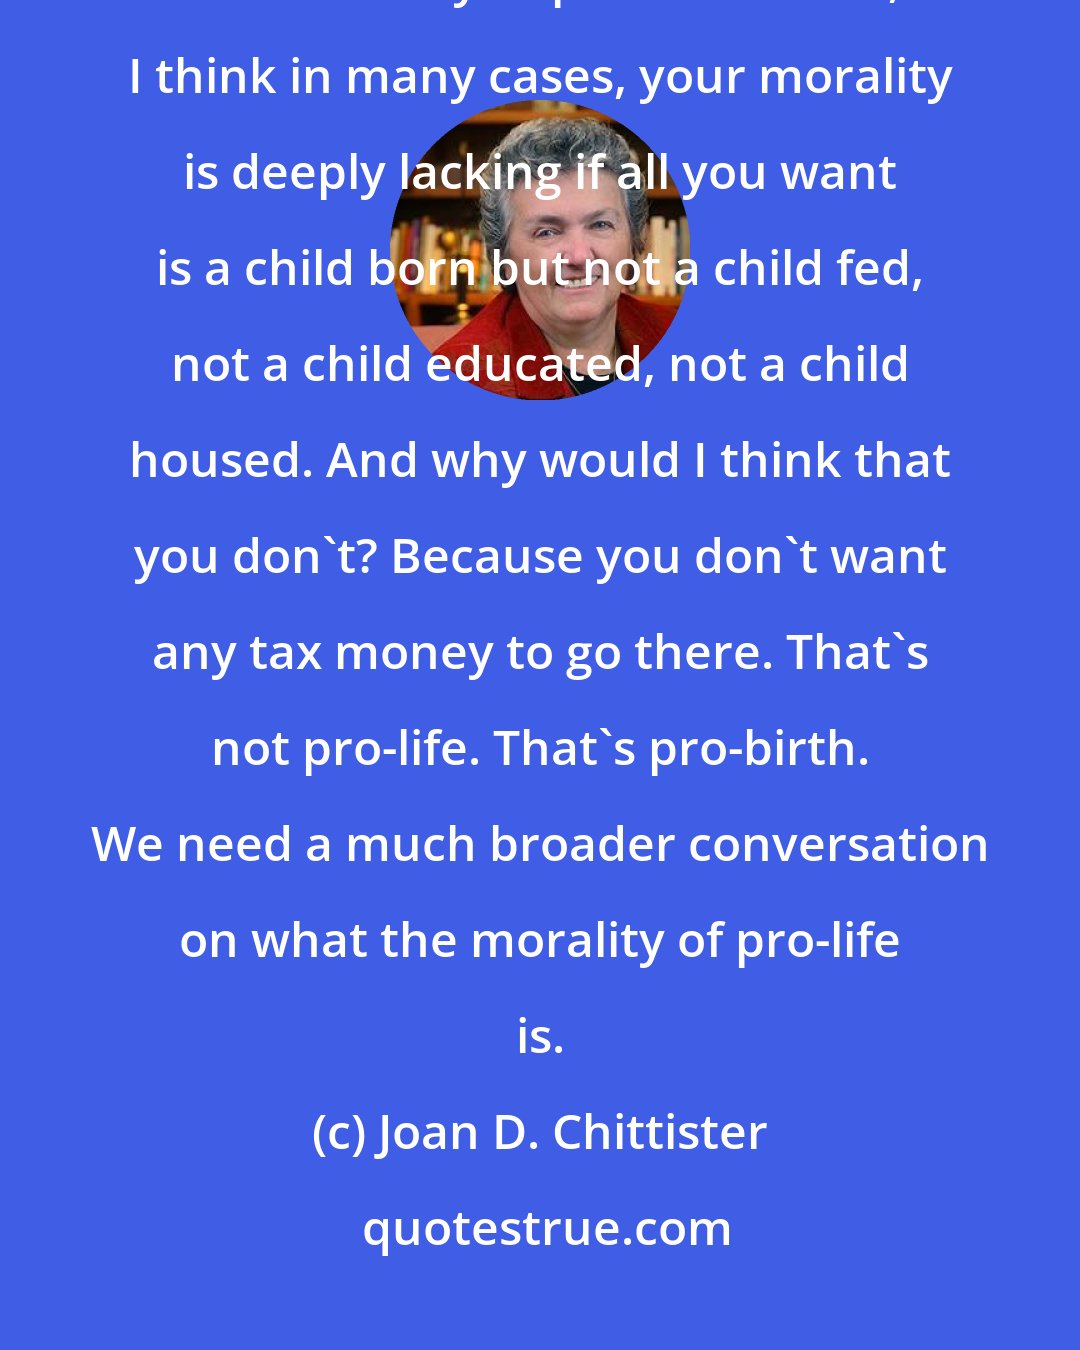 Joan D. Chittister: I do not believe that just because you're opposed to abortion, that that makes you pro-life. In fact, I think in many cases, your morality is deeply lacking if all you want is a child born but not a child fed, not a child educated, not a child housed. And why would I think that you don't? Because you don't want any tax money to go there. That's not pro-life. That's pro-birth. We need a much broader conversation on what the morality of pro-life is.